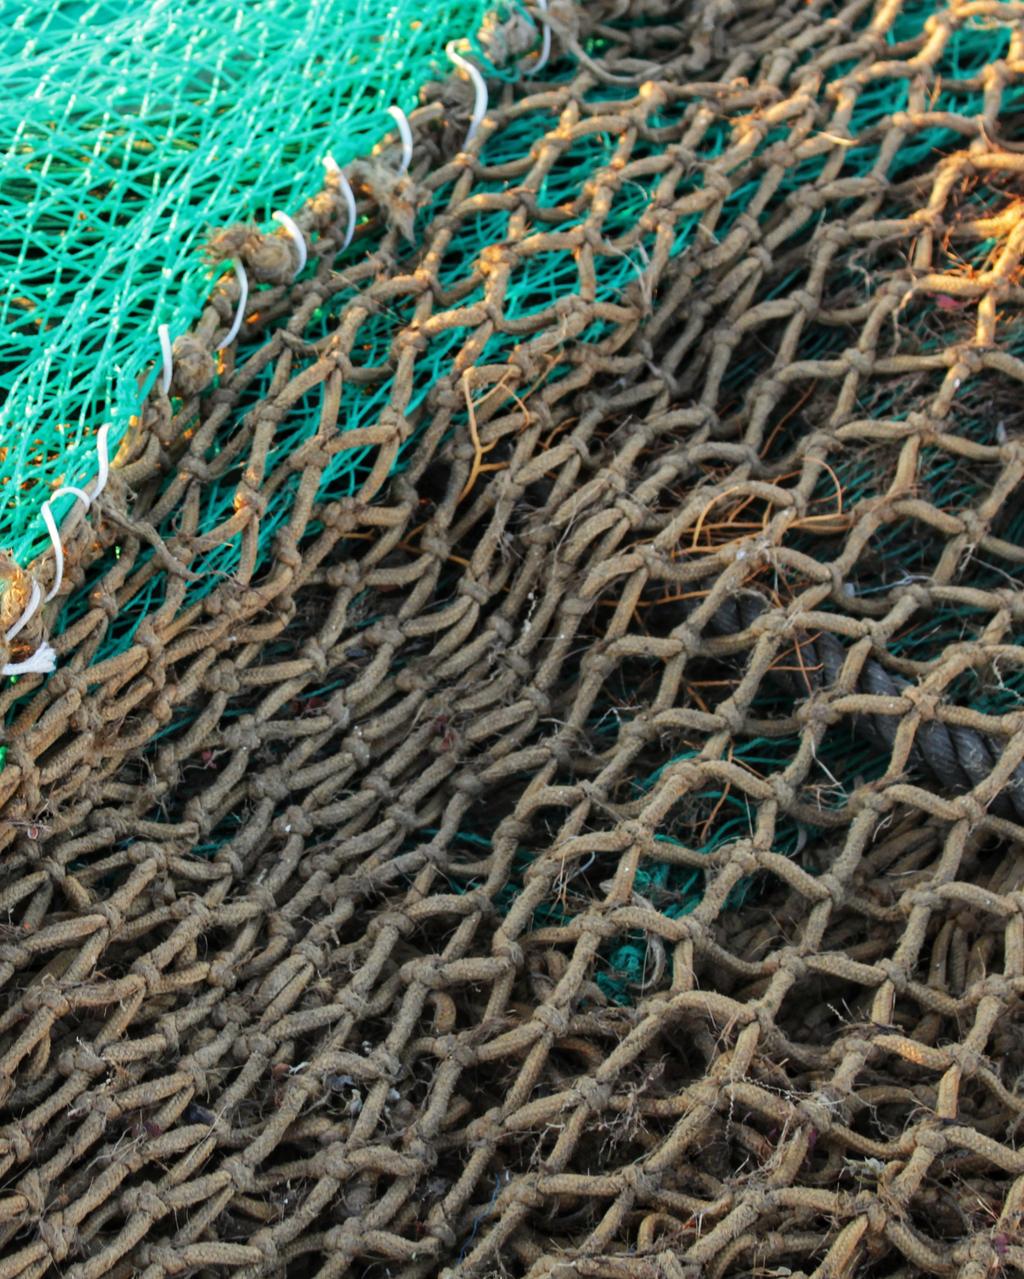 down your nets for